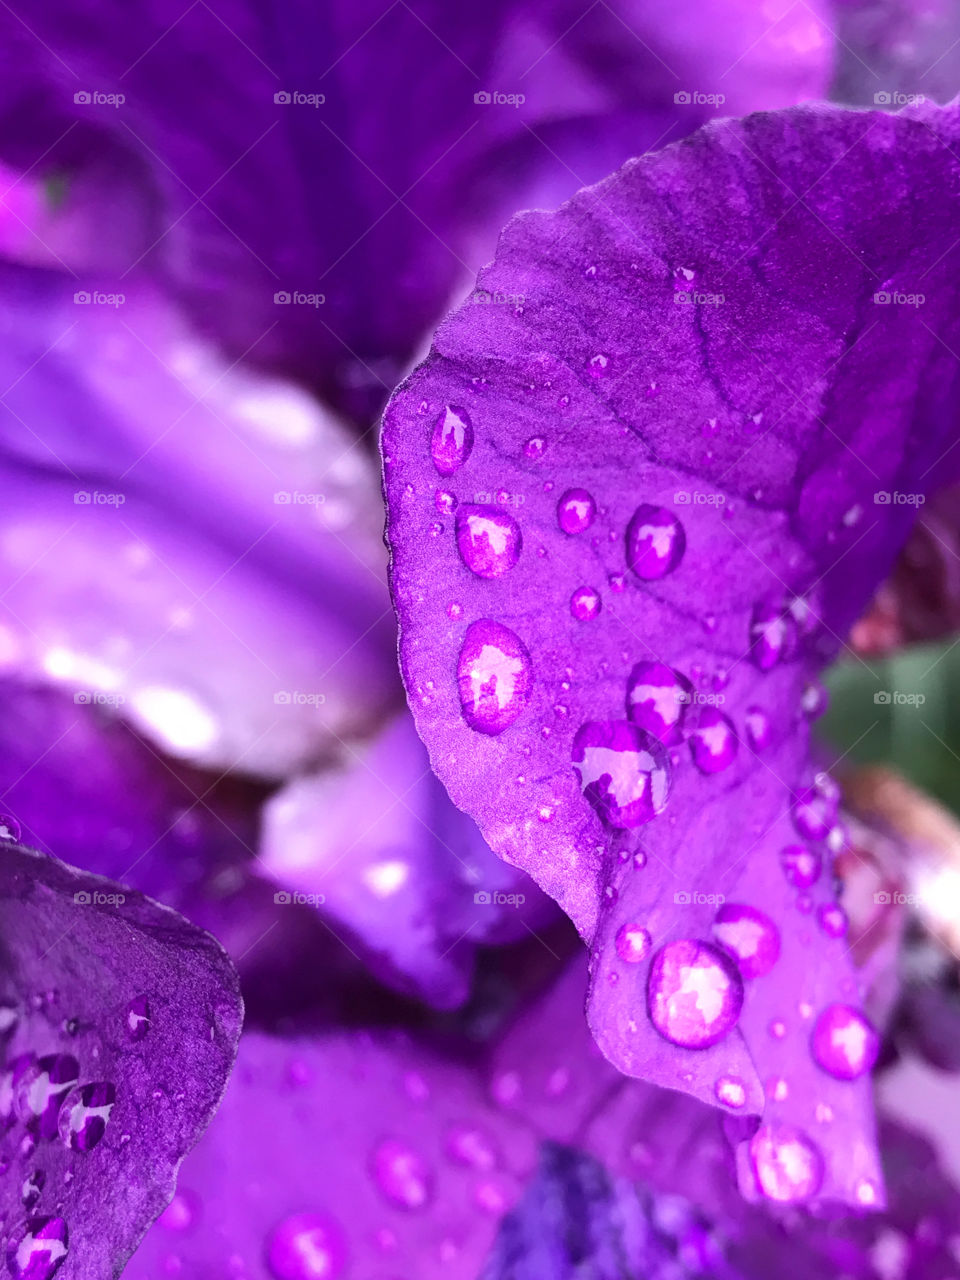 Capturing water drops on flowers